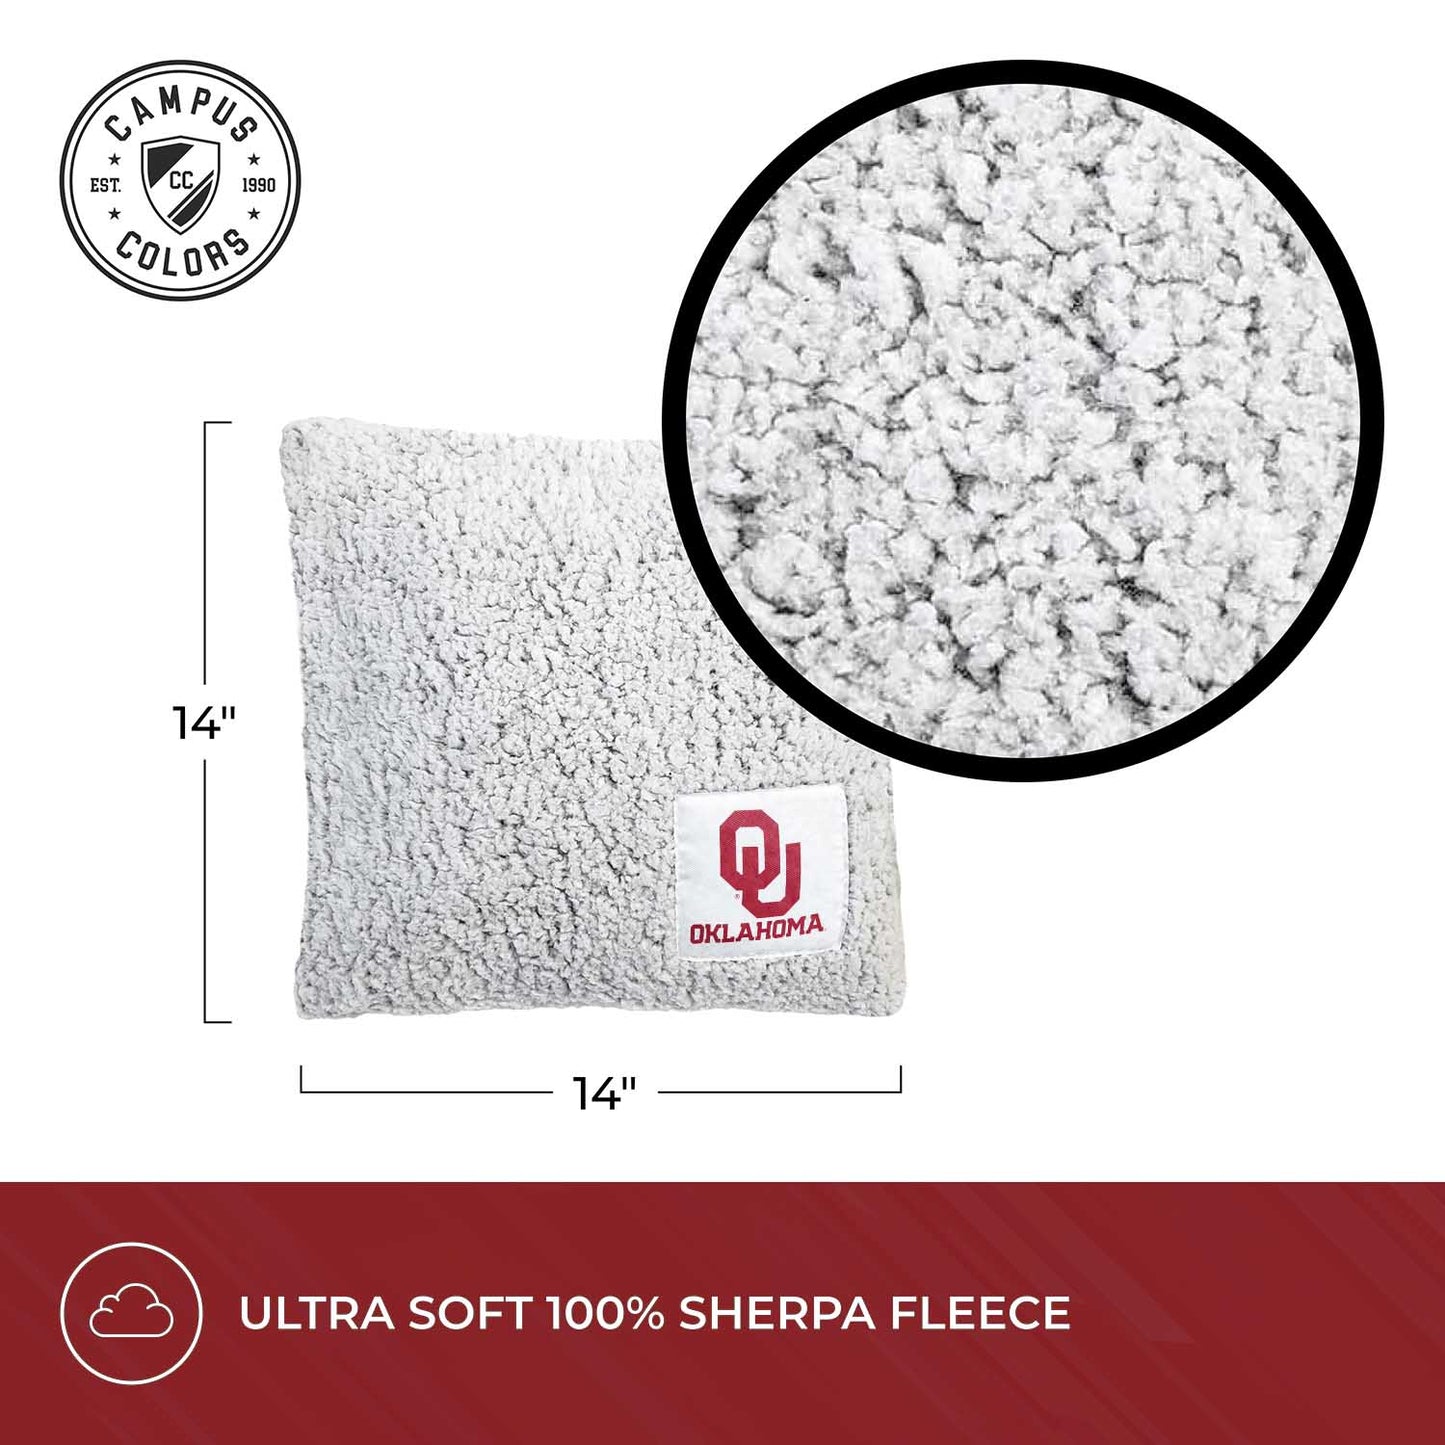 Oklahoma Sooners Two Tone Sherpa Throw Pillow - Team Color